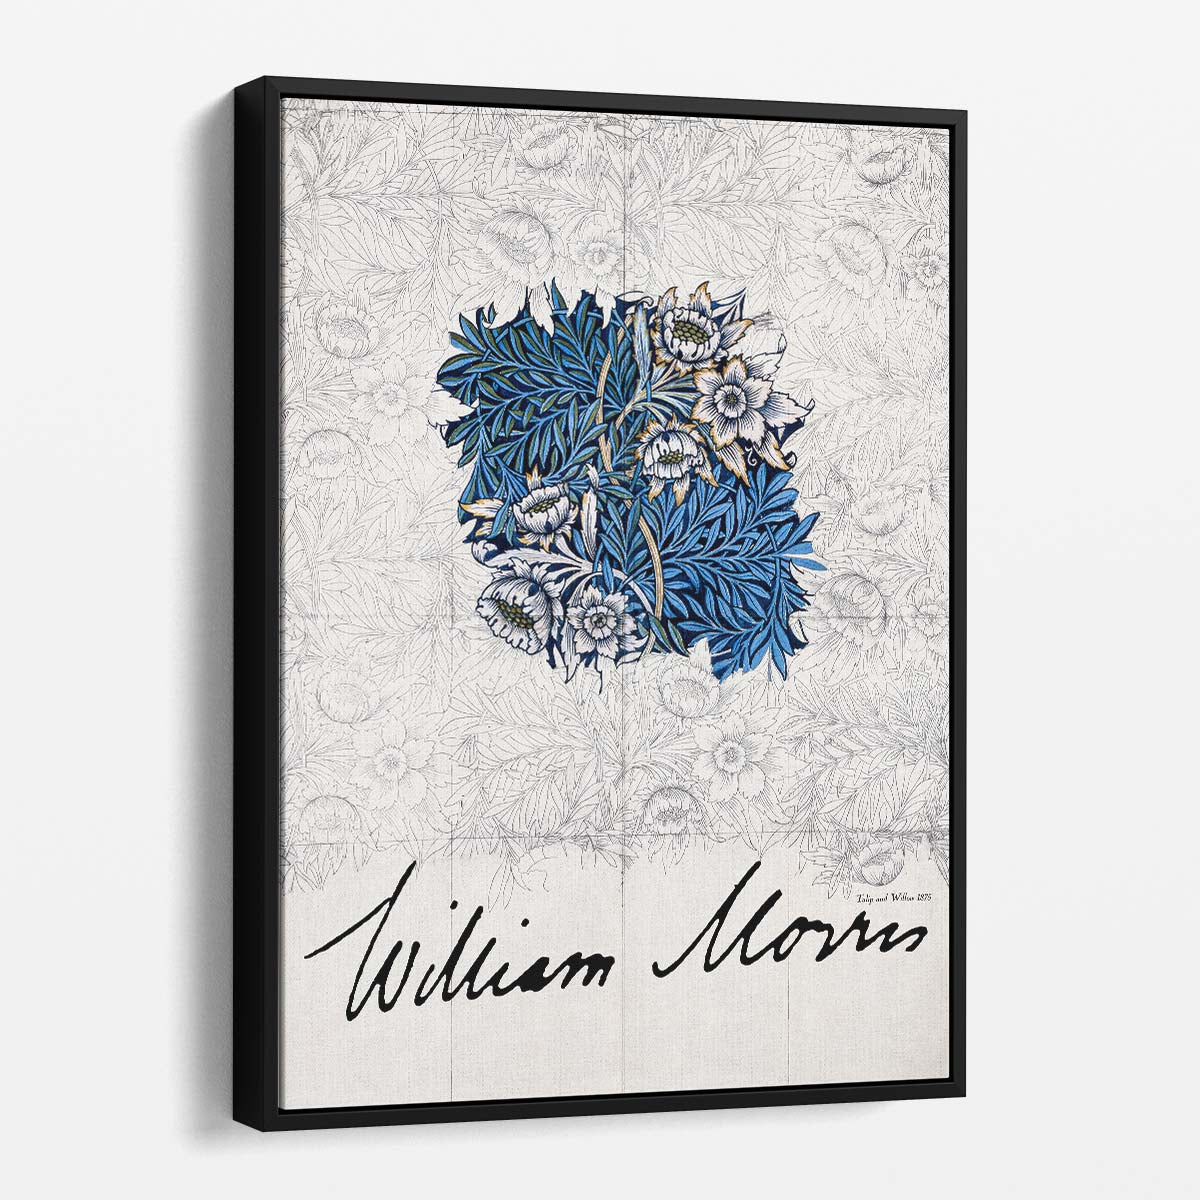 William Morris Vintage Tulip & Willow Botanical Illustration Poster by Luxuriance Designs, made in USA